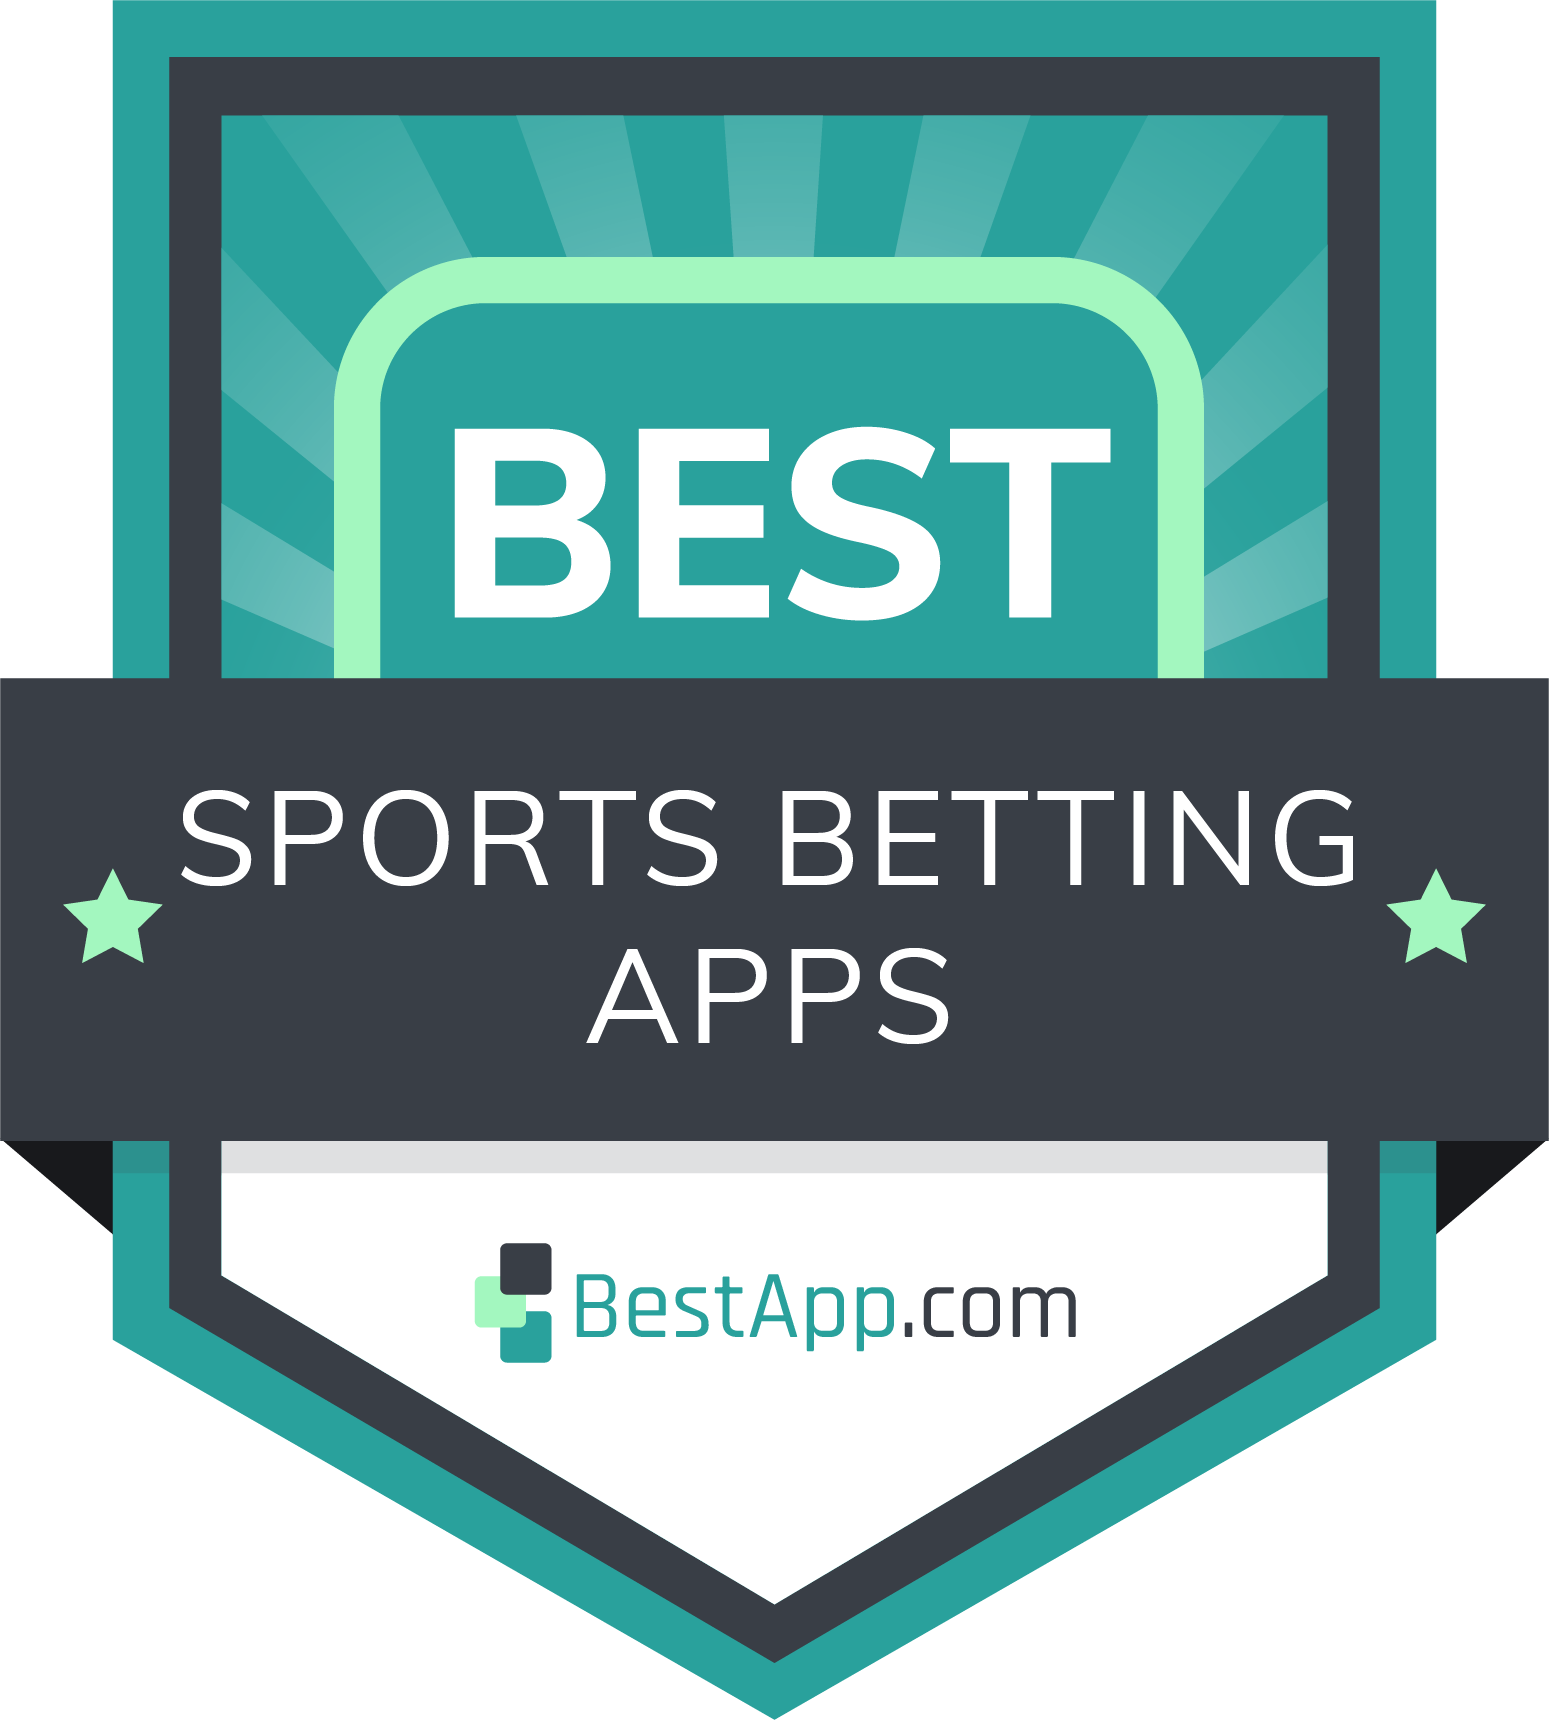 Clear And Unbiased Facts About betting Without All the Hype